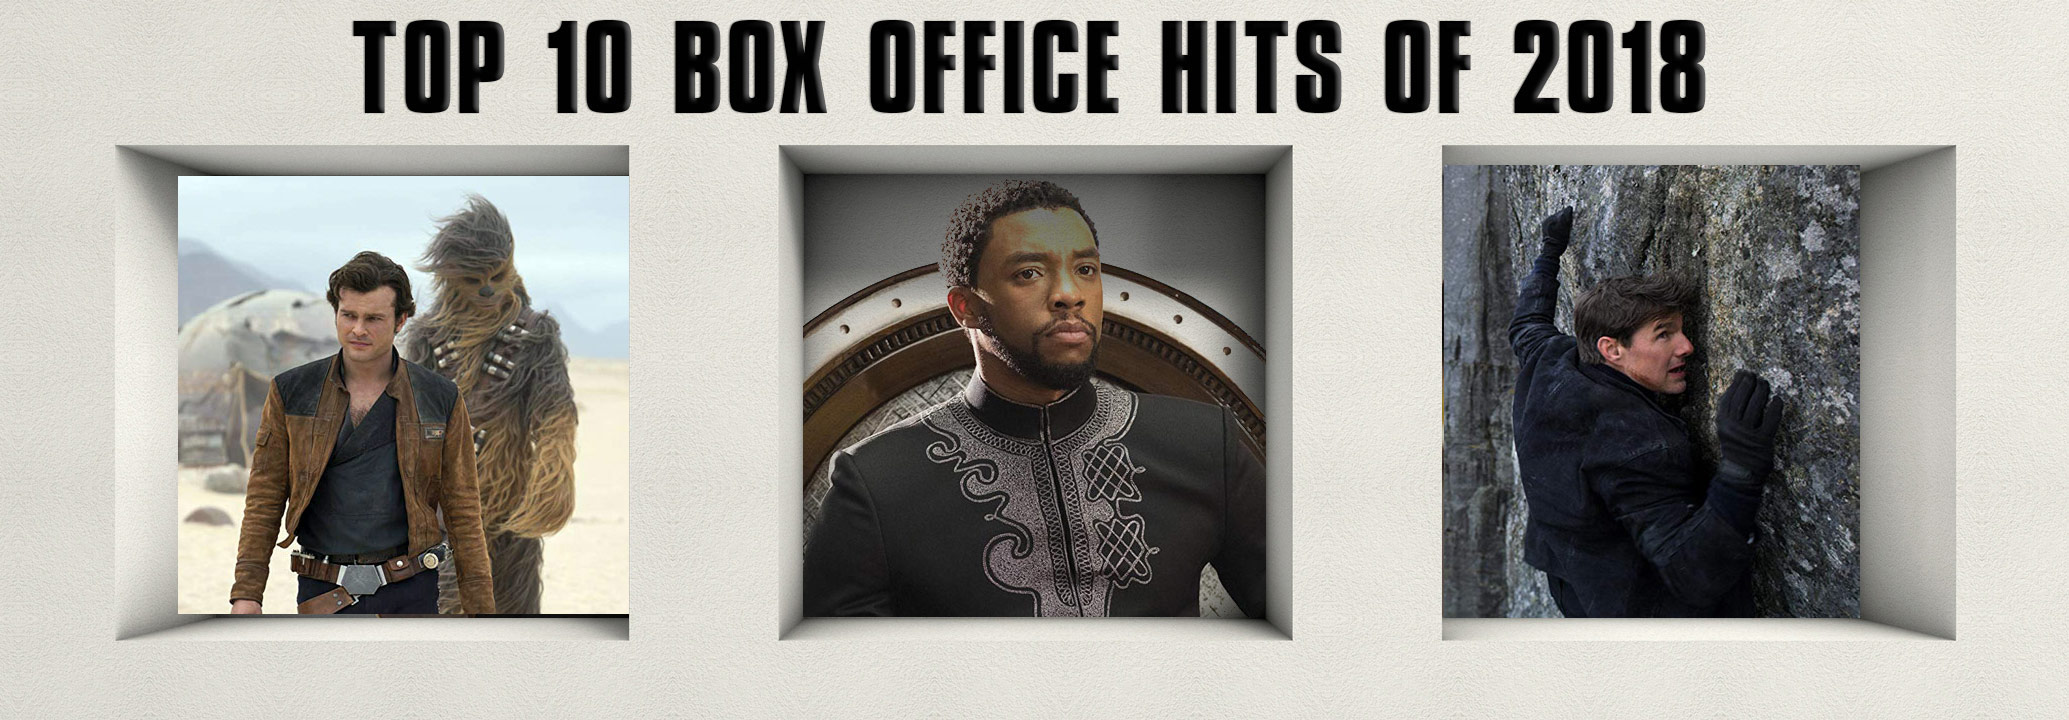 Top 10 Box office hits of 2018